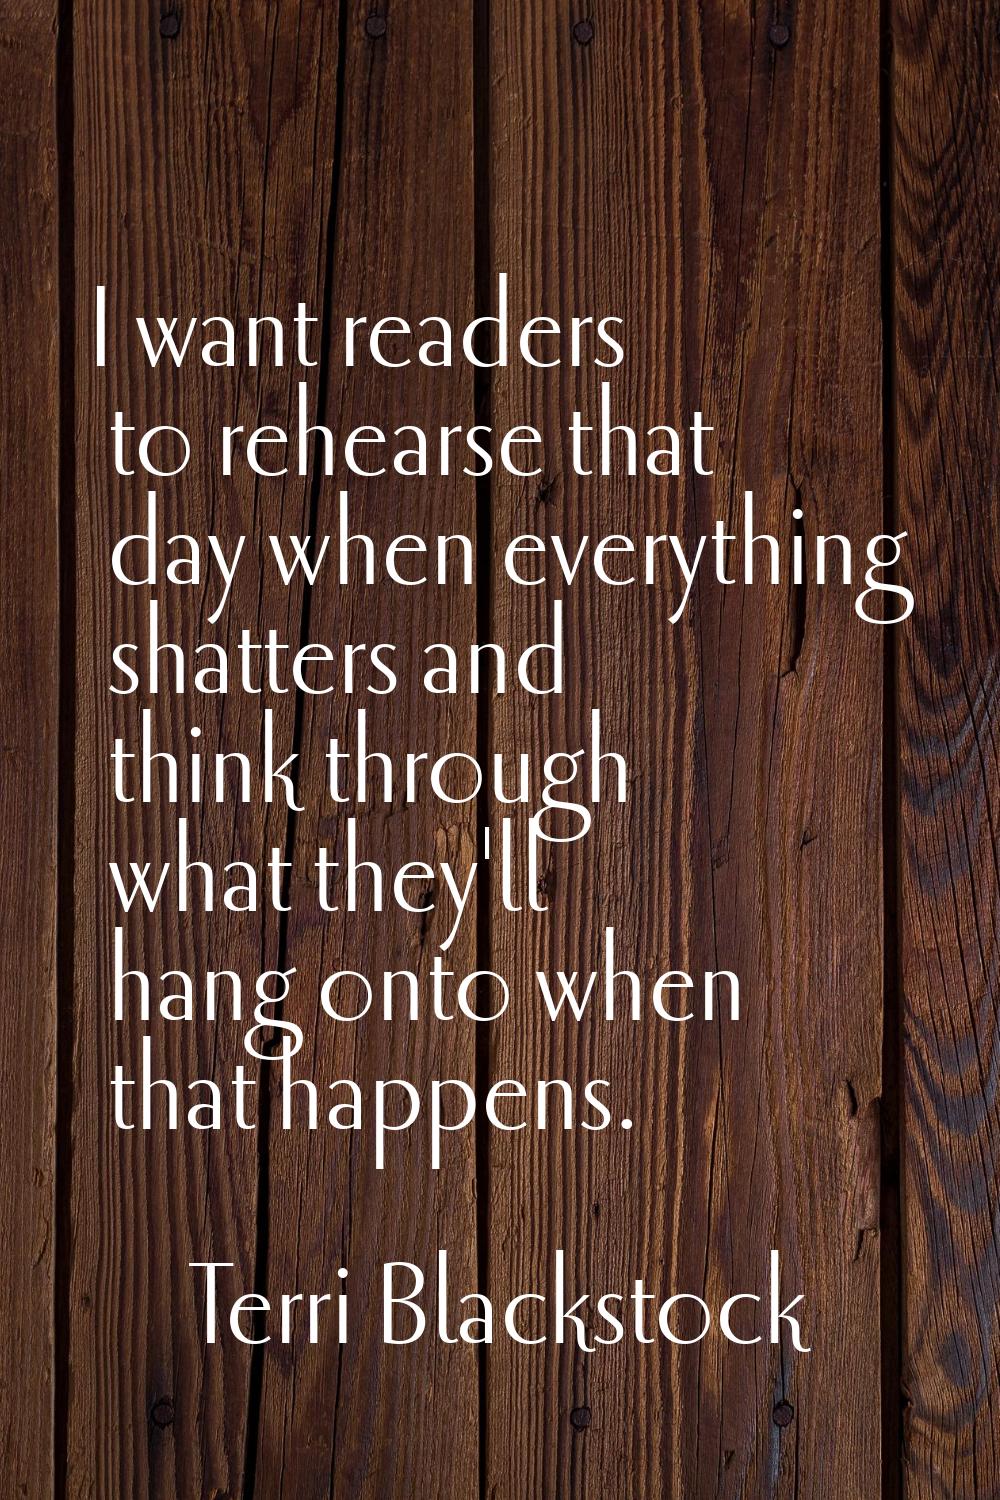 I want readers to rehearse that day when everything shatters and think through what they'll hang on